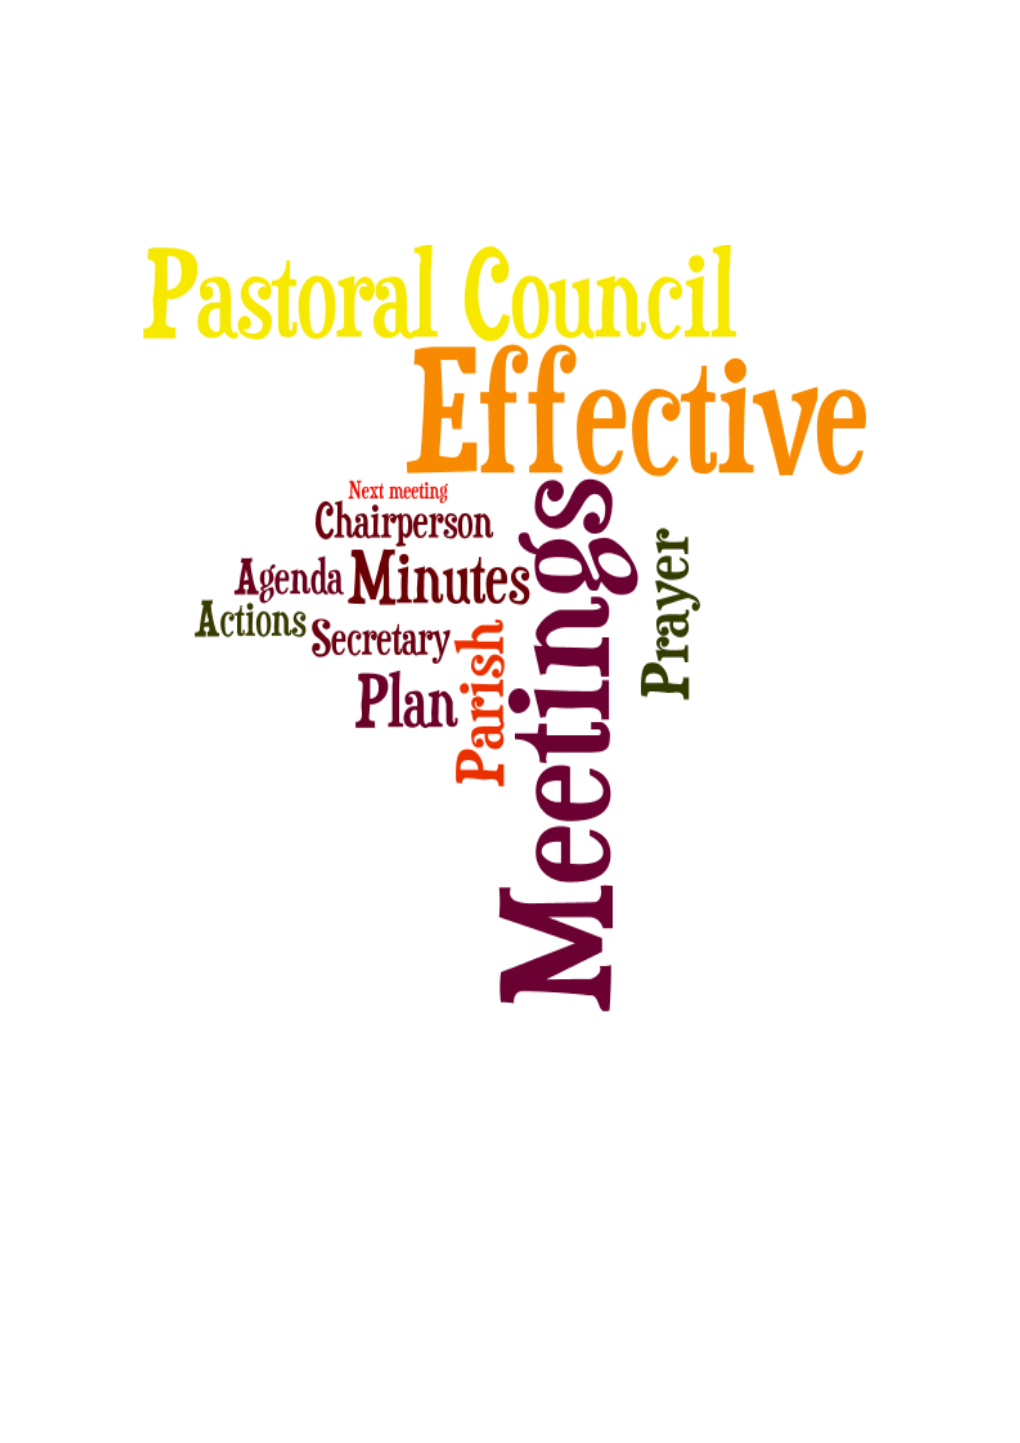 Productive Meetings Enable Pastoral Councils to Be Effective